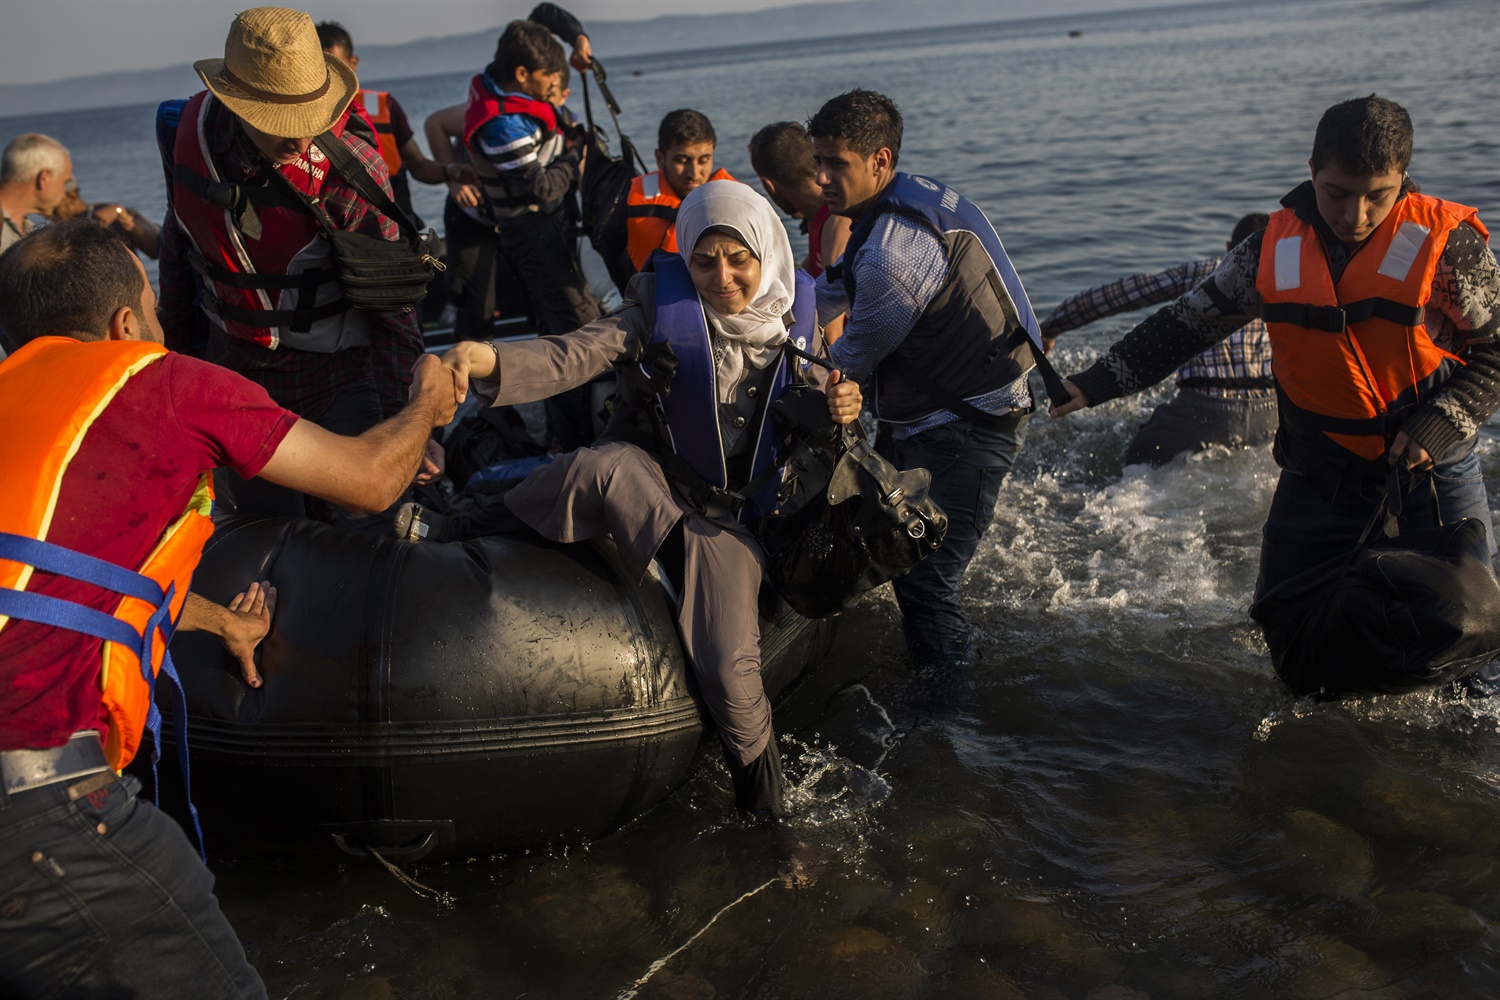 Migrants from Syria, Afghanistan arrive on Lesbos. July 15. AP Photo, Santi Palacios